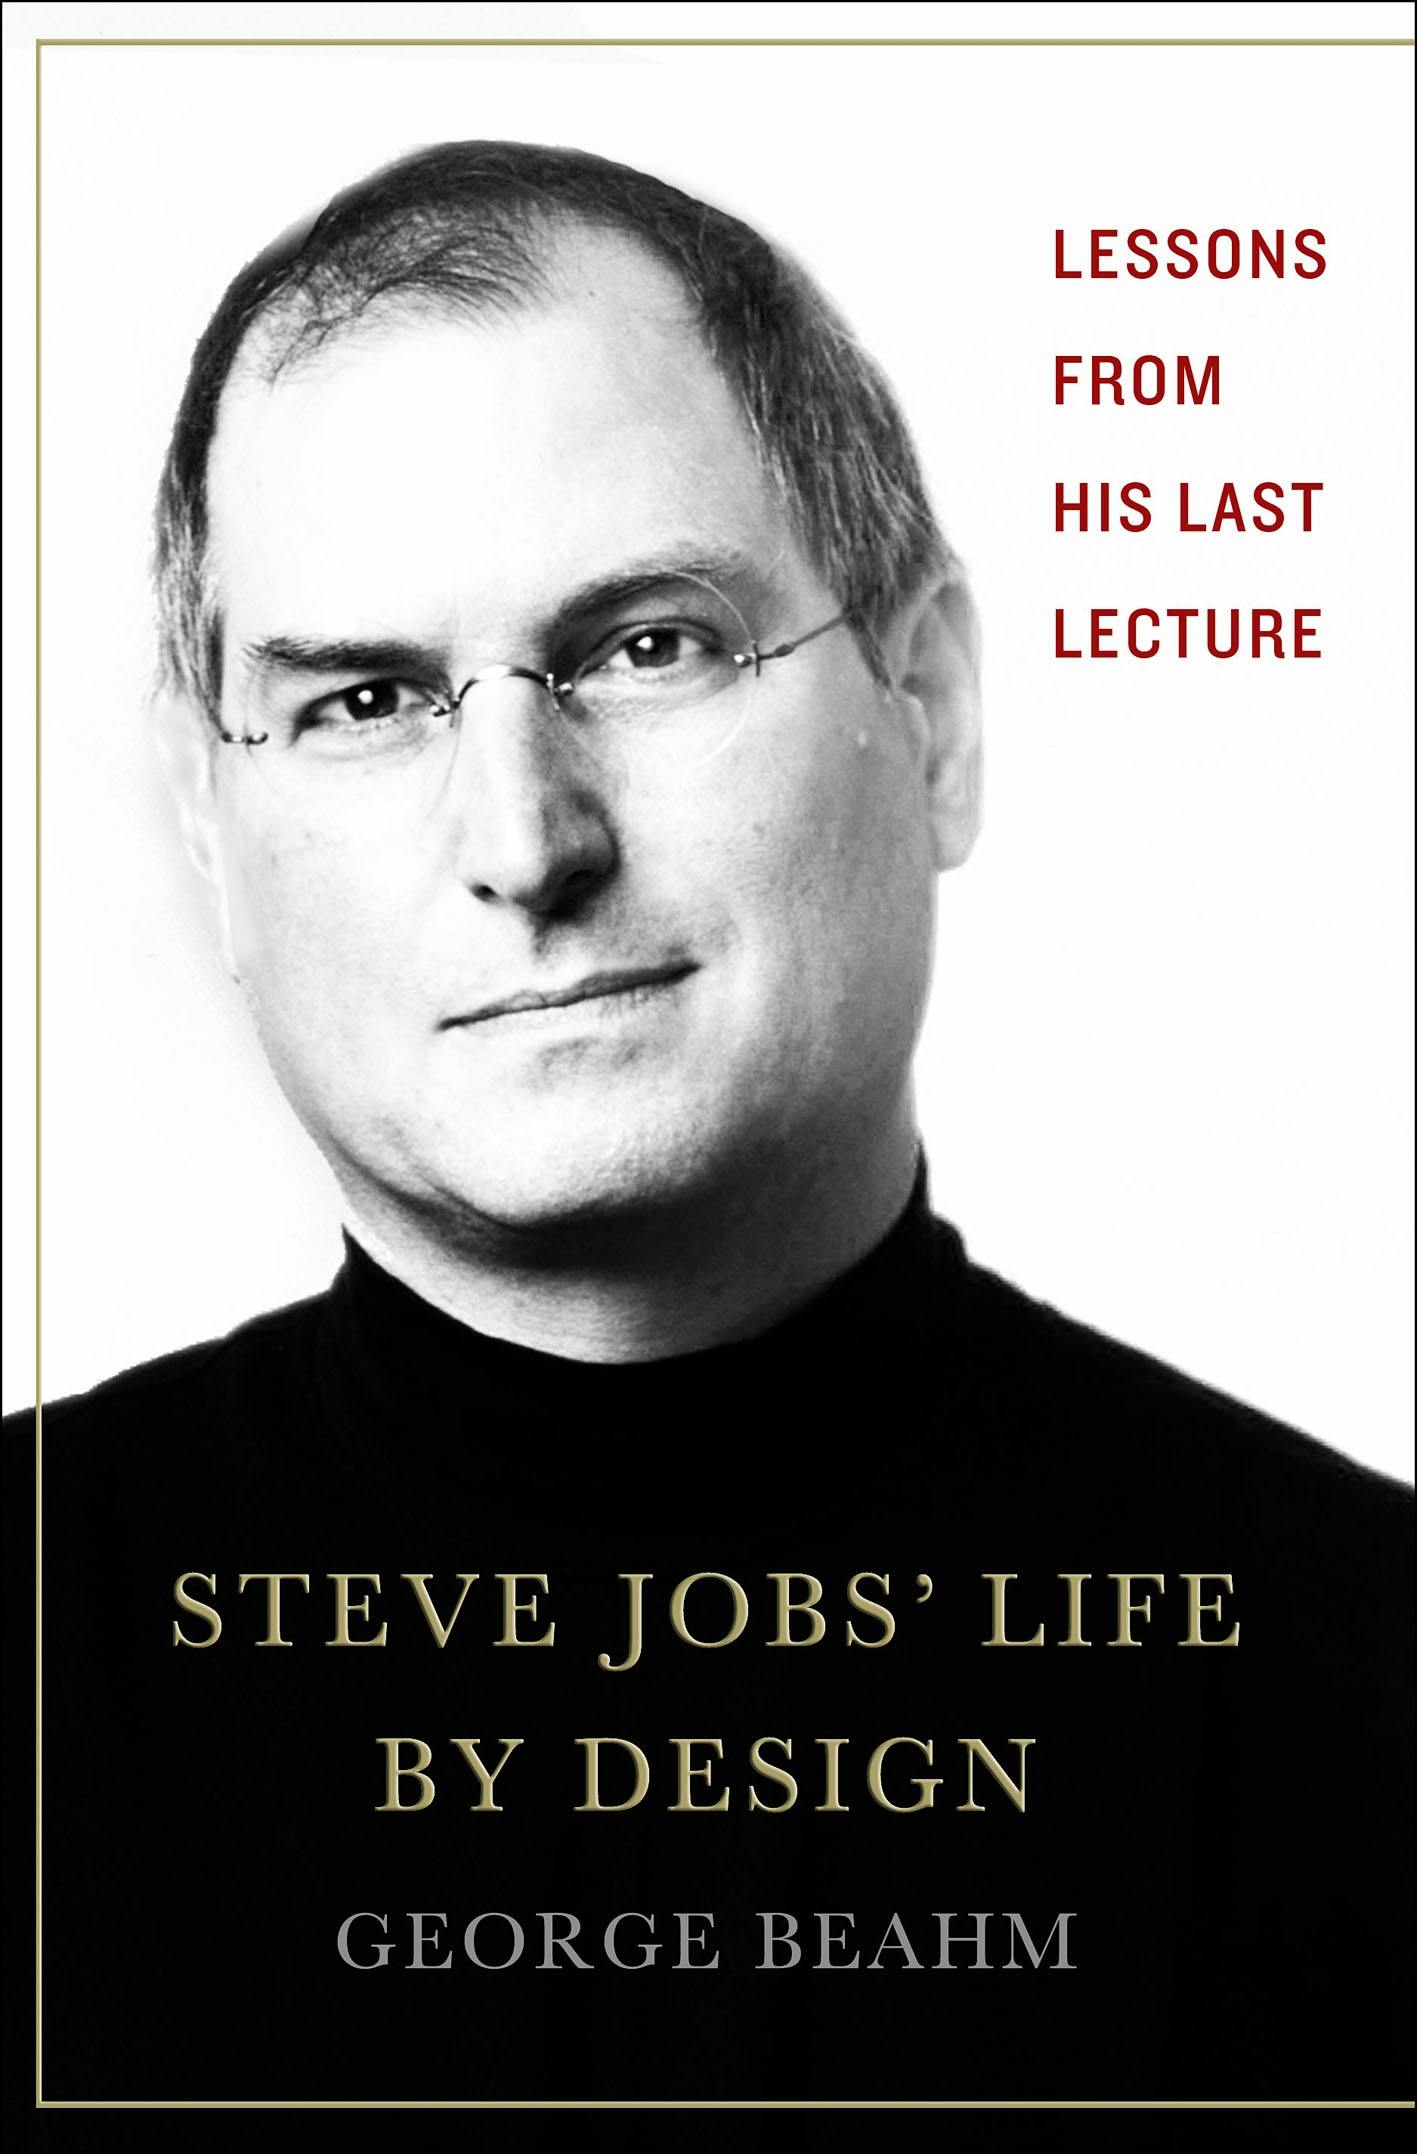 Describes for Steve Jobs’ Life By Design by authors